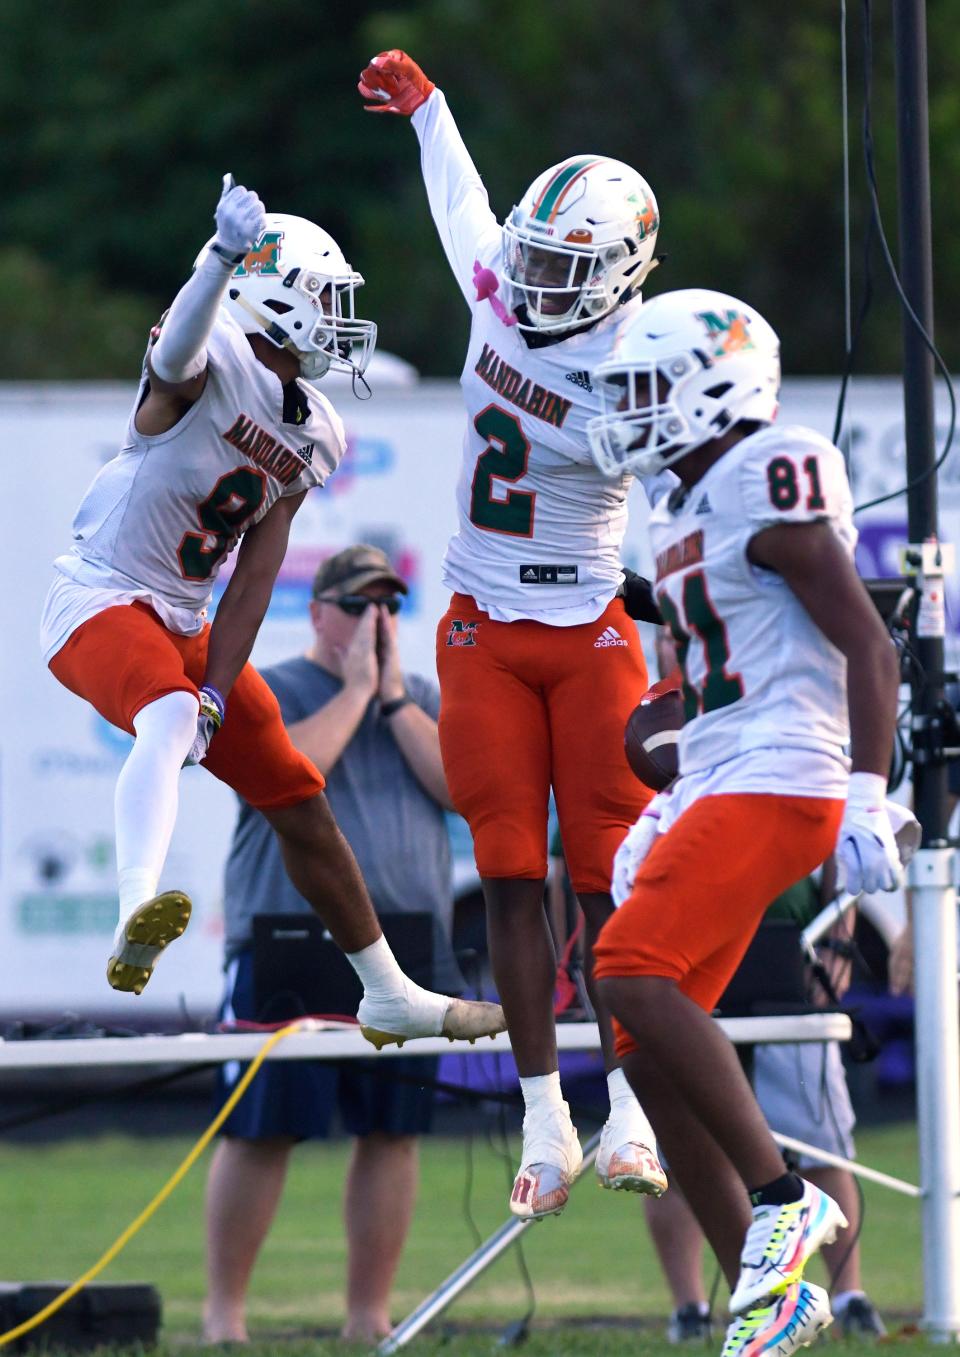 Mandarin's Jaime Ffrench (2) celebrates with teammates Josiah Watkins (81) and Kieren Jackson (9) after Ffrench took a pass for a 65 yard touchdown in early first-quarter action against Fletcher on Aug. 26.